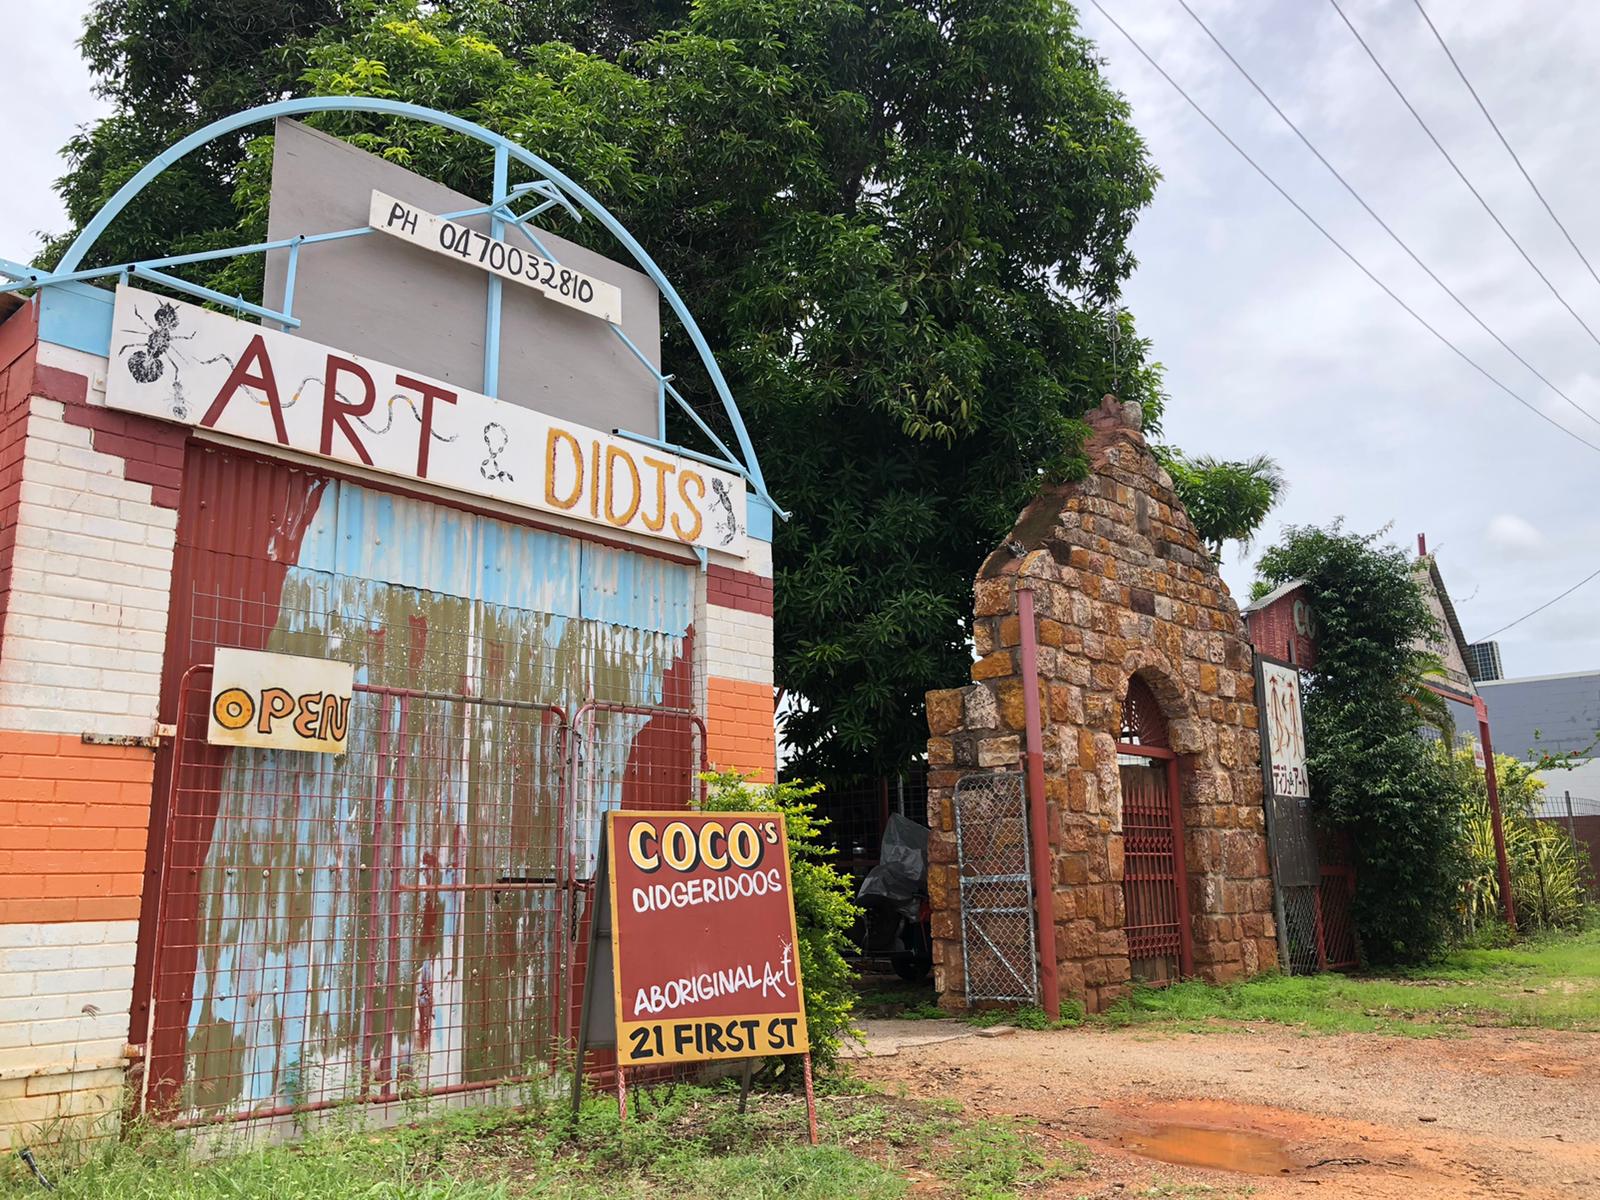 Local art studio in Katherine encourages art and artists